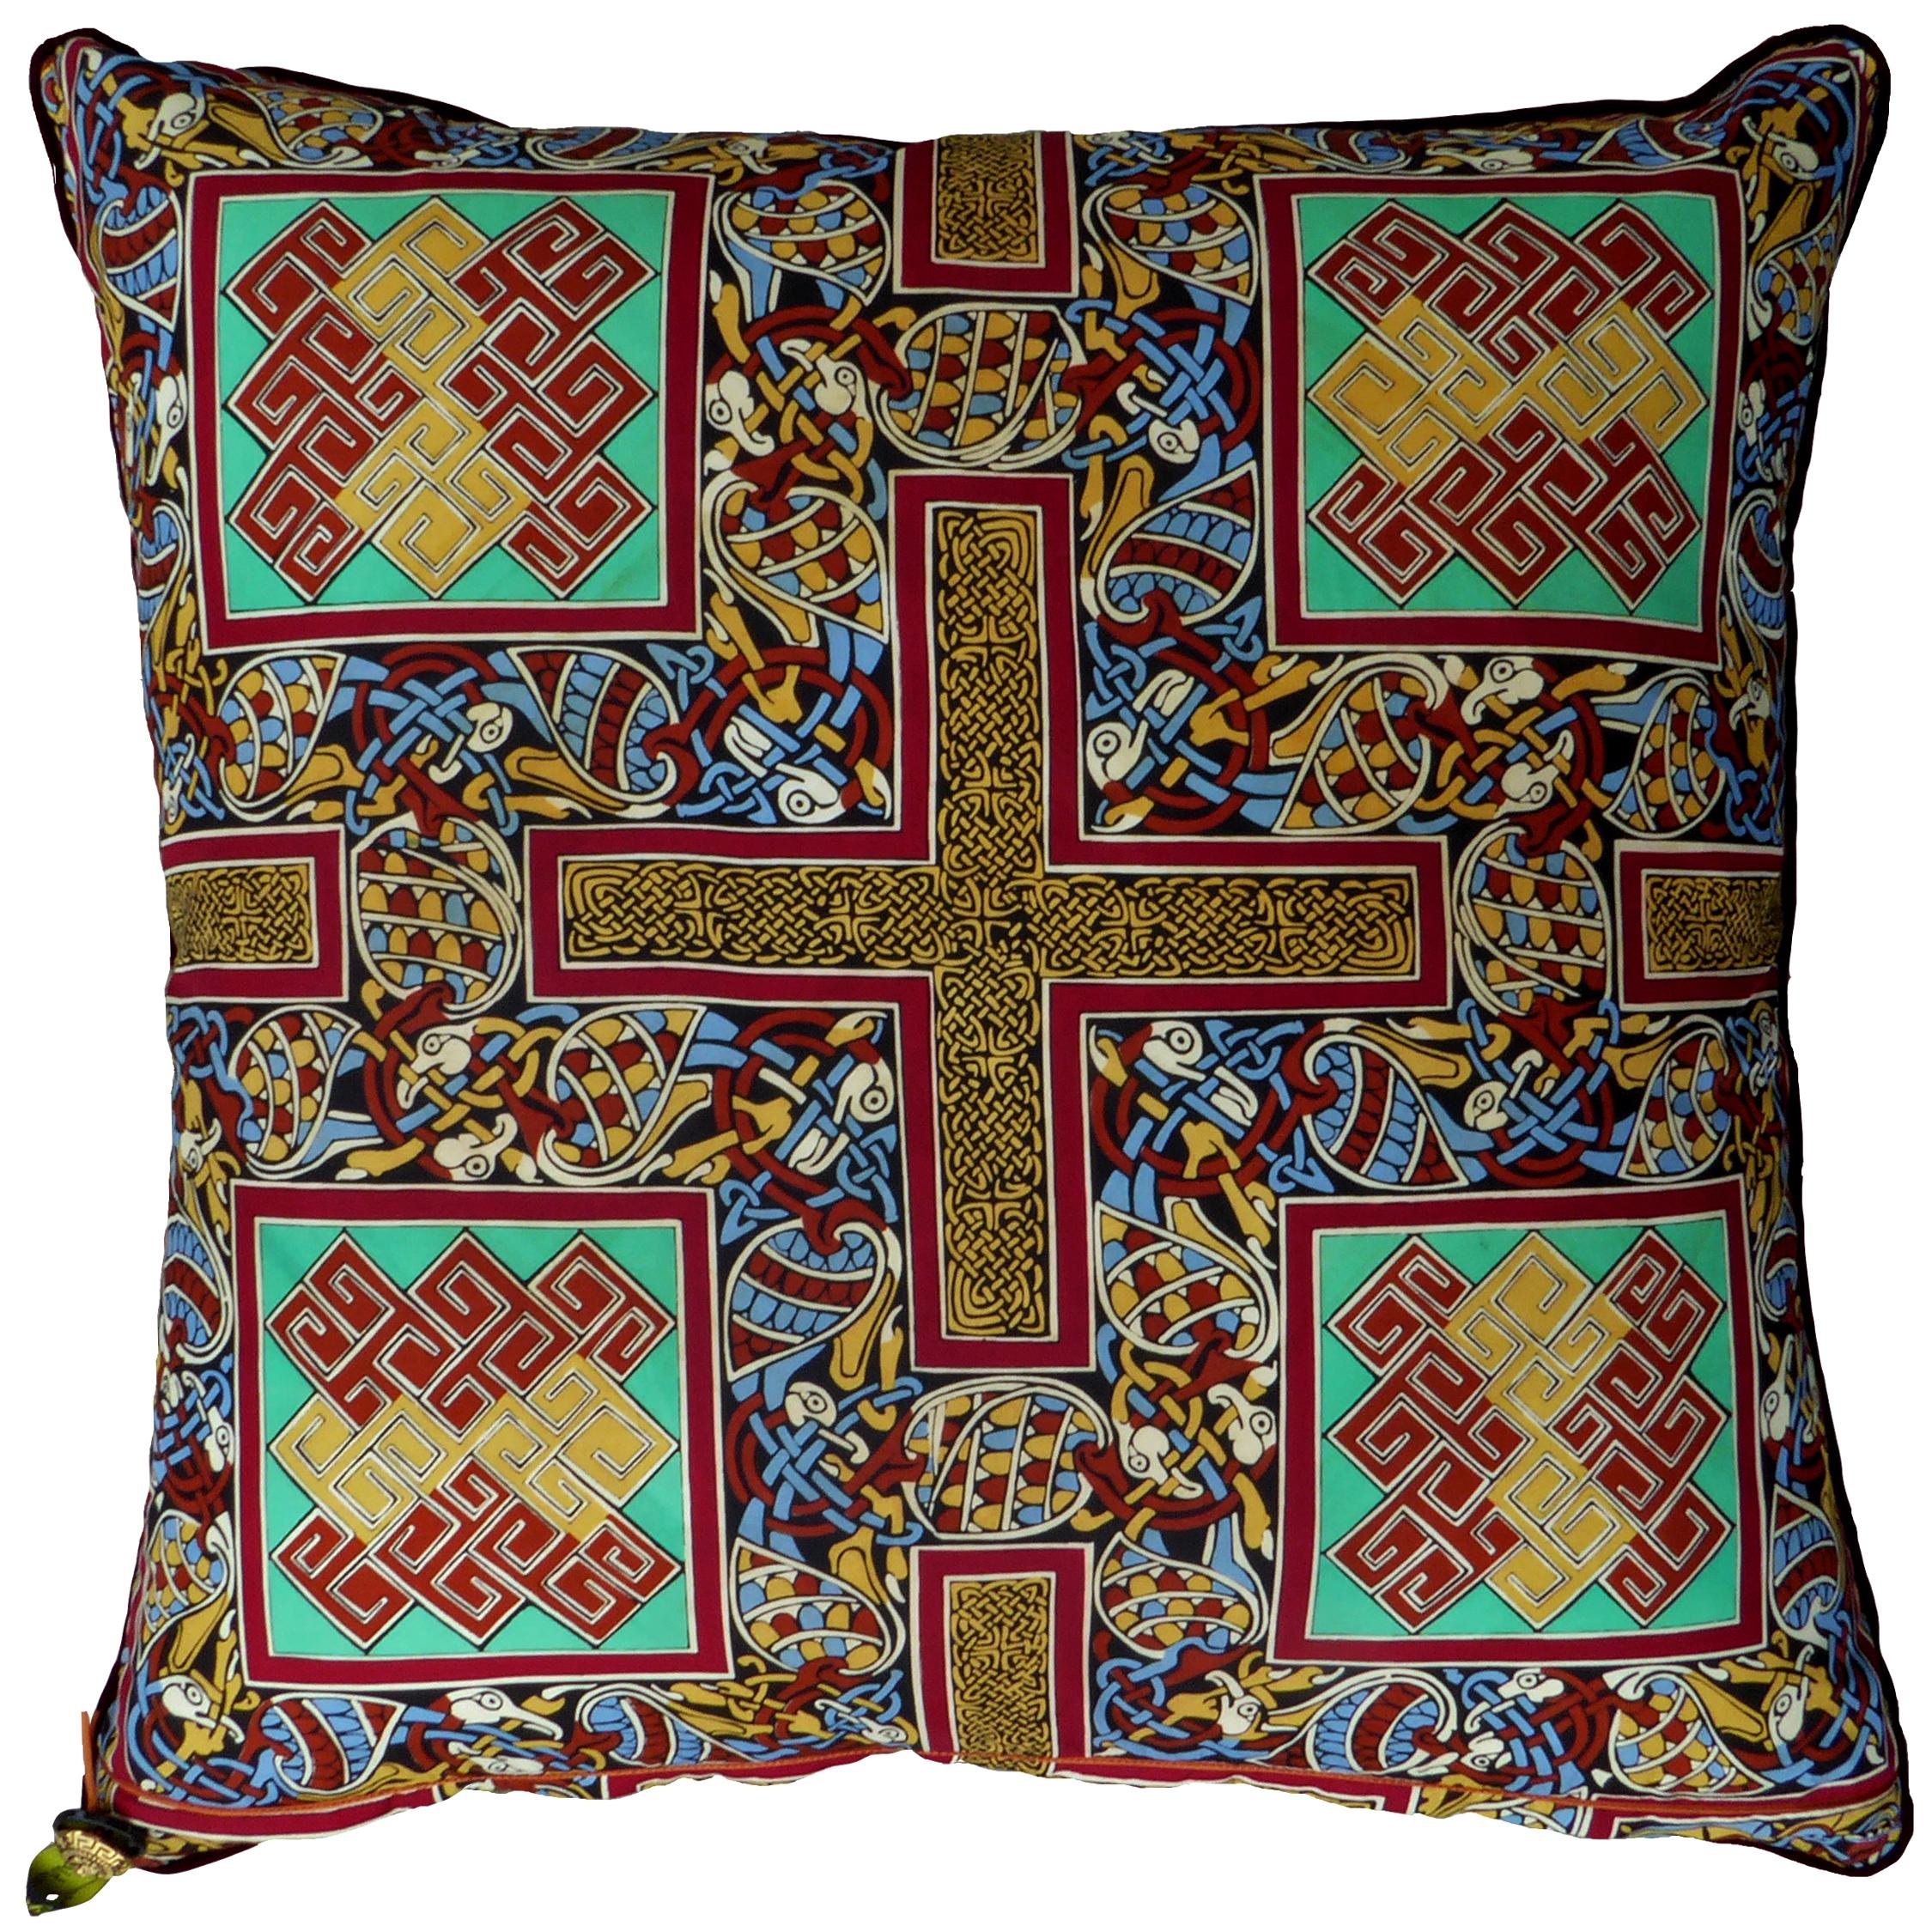 The Liberty Building
circa 1970 and 1980
British made bespoke luxury cushion created using original vintage silks. The front side features the wonderful graphics of the iconic Liberty Building – manufactured and designed by Liberty of London.